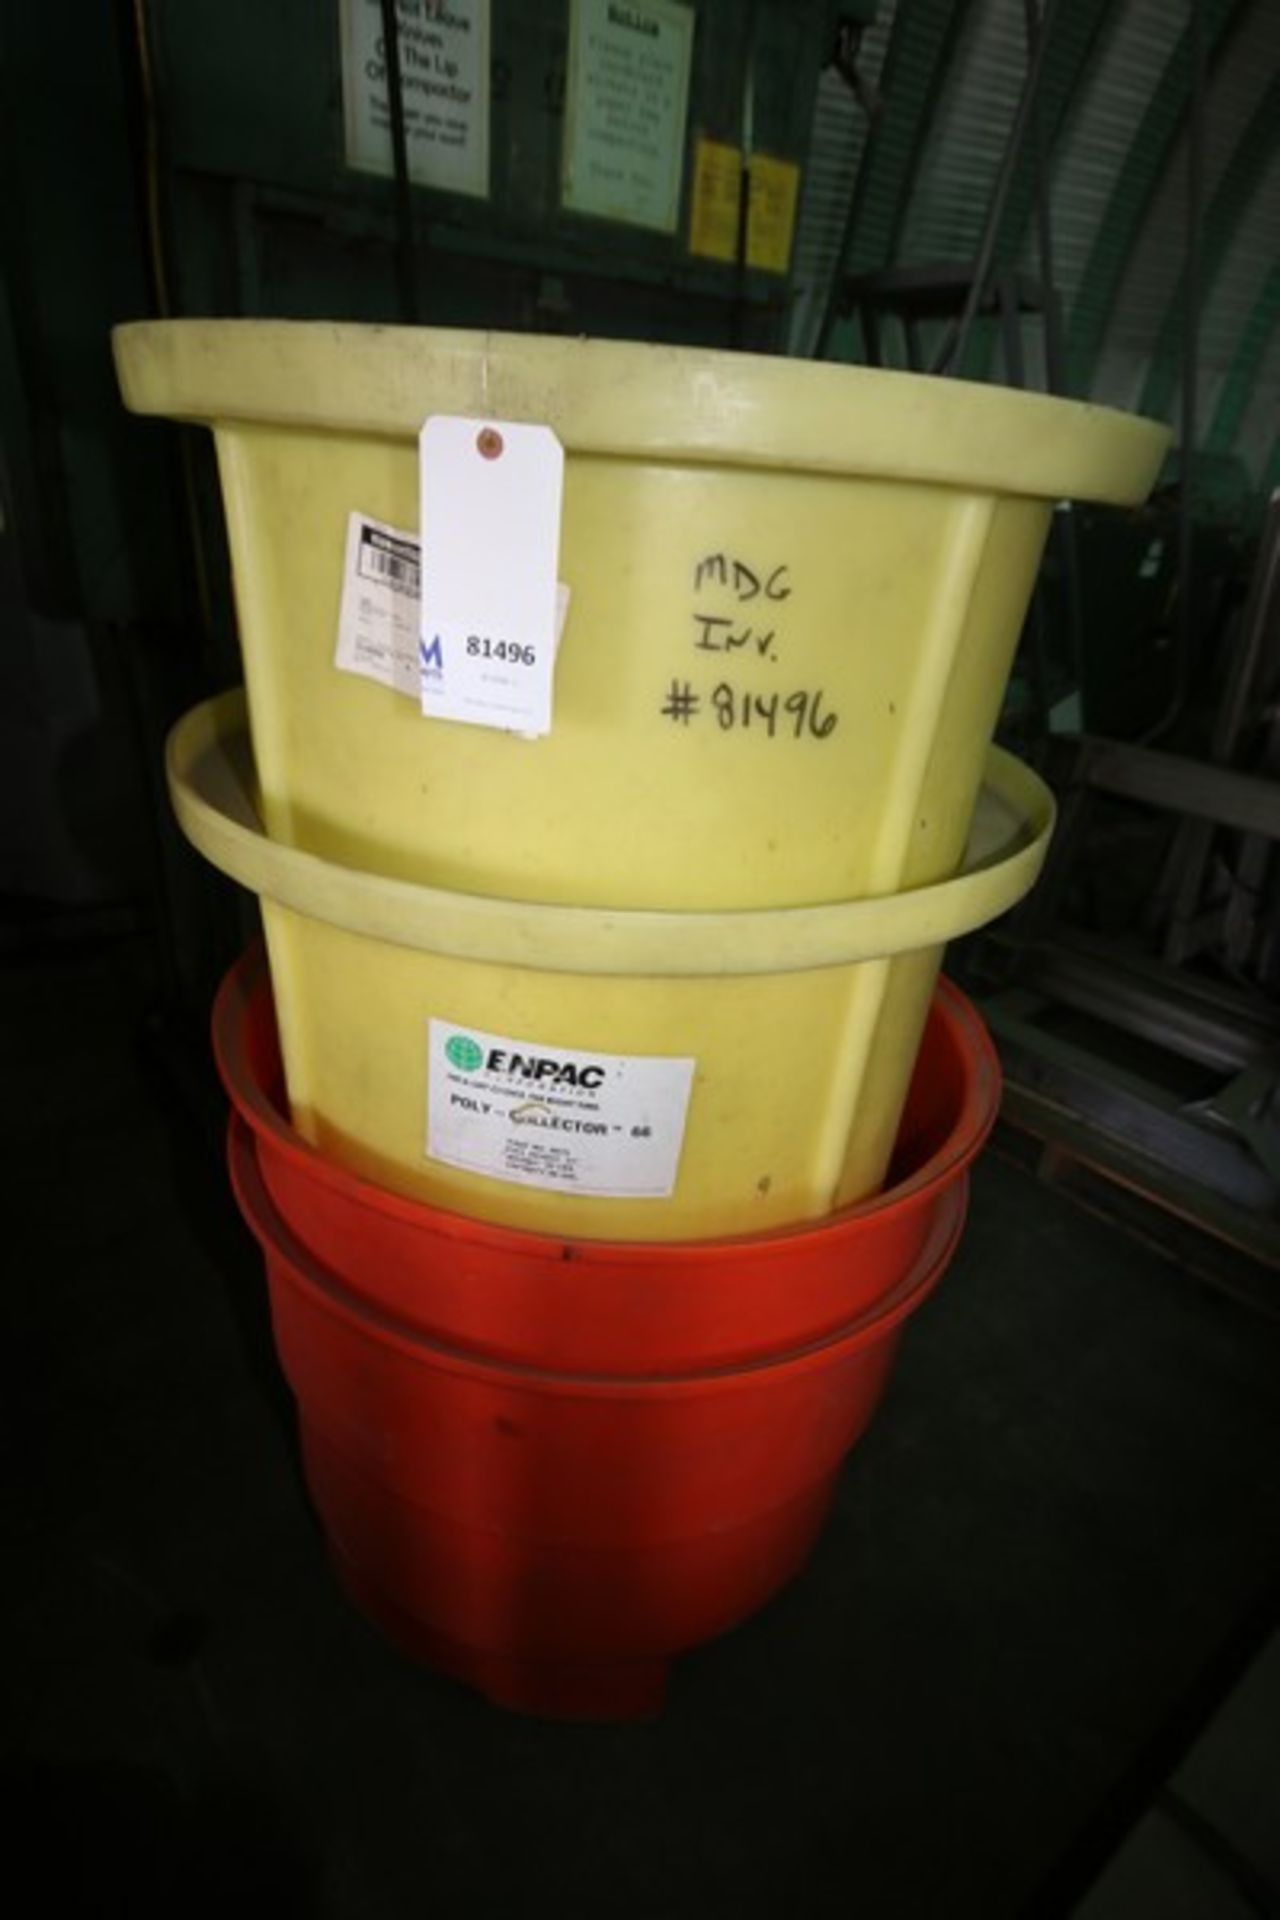 Lot of (4) Enerpac & Spill Killer Barrel Containments (INV#81496)(Located @ the MDG Auction Showroom